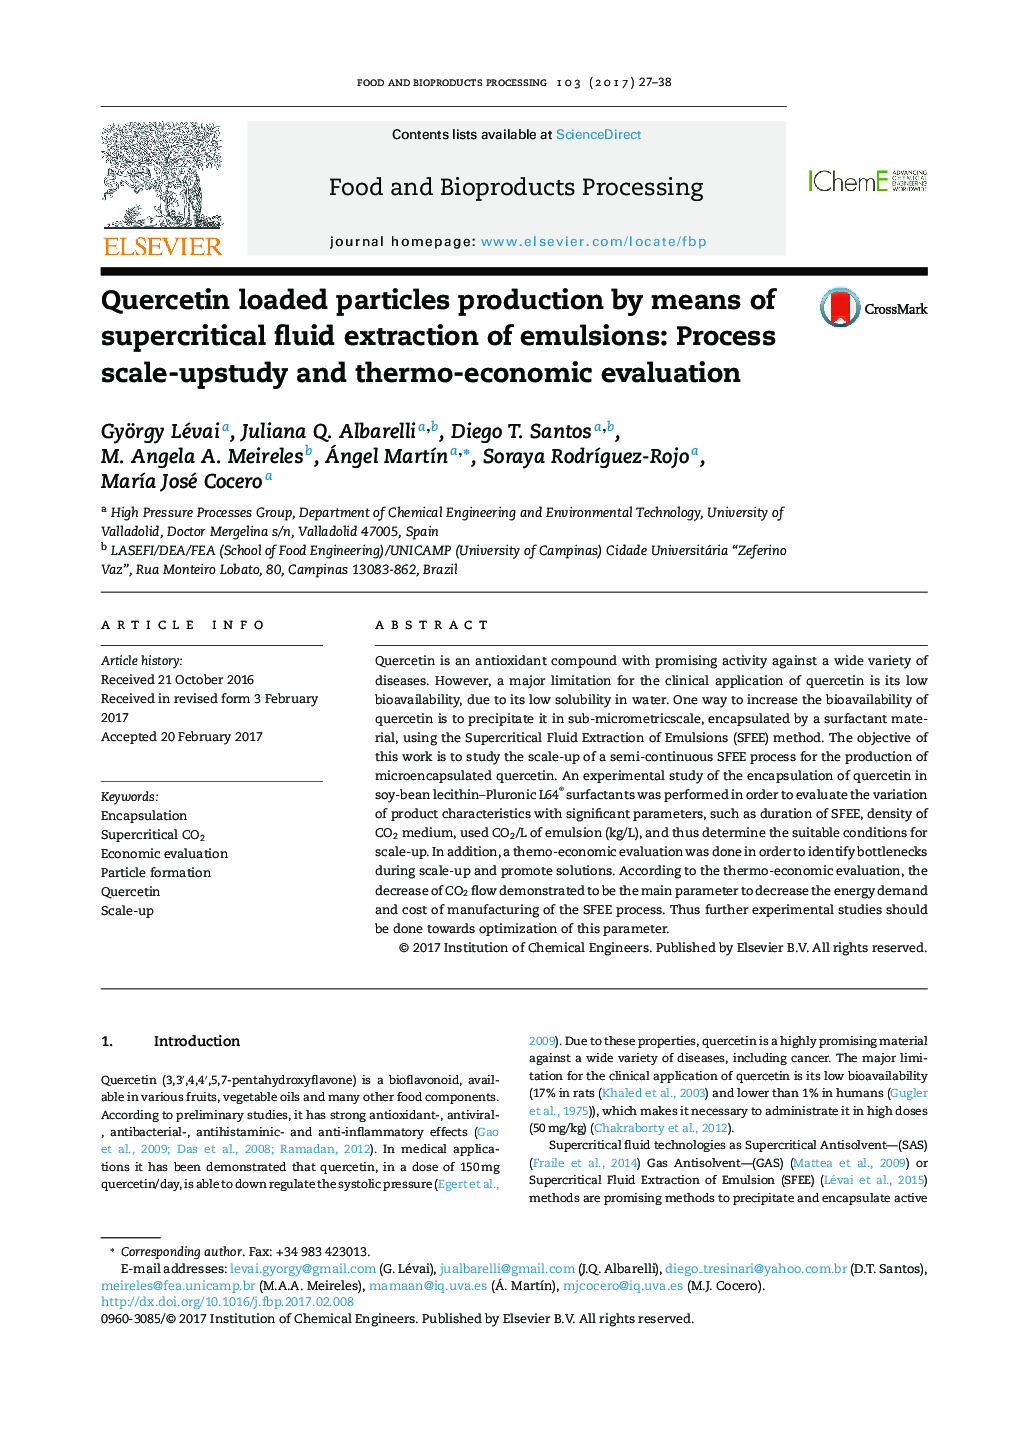 Quercetin loaded particles production by means of supercritical fluid extraction of emulsions: Process scale-upstudy and thermo-economic evaluation